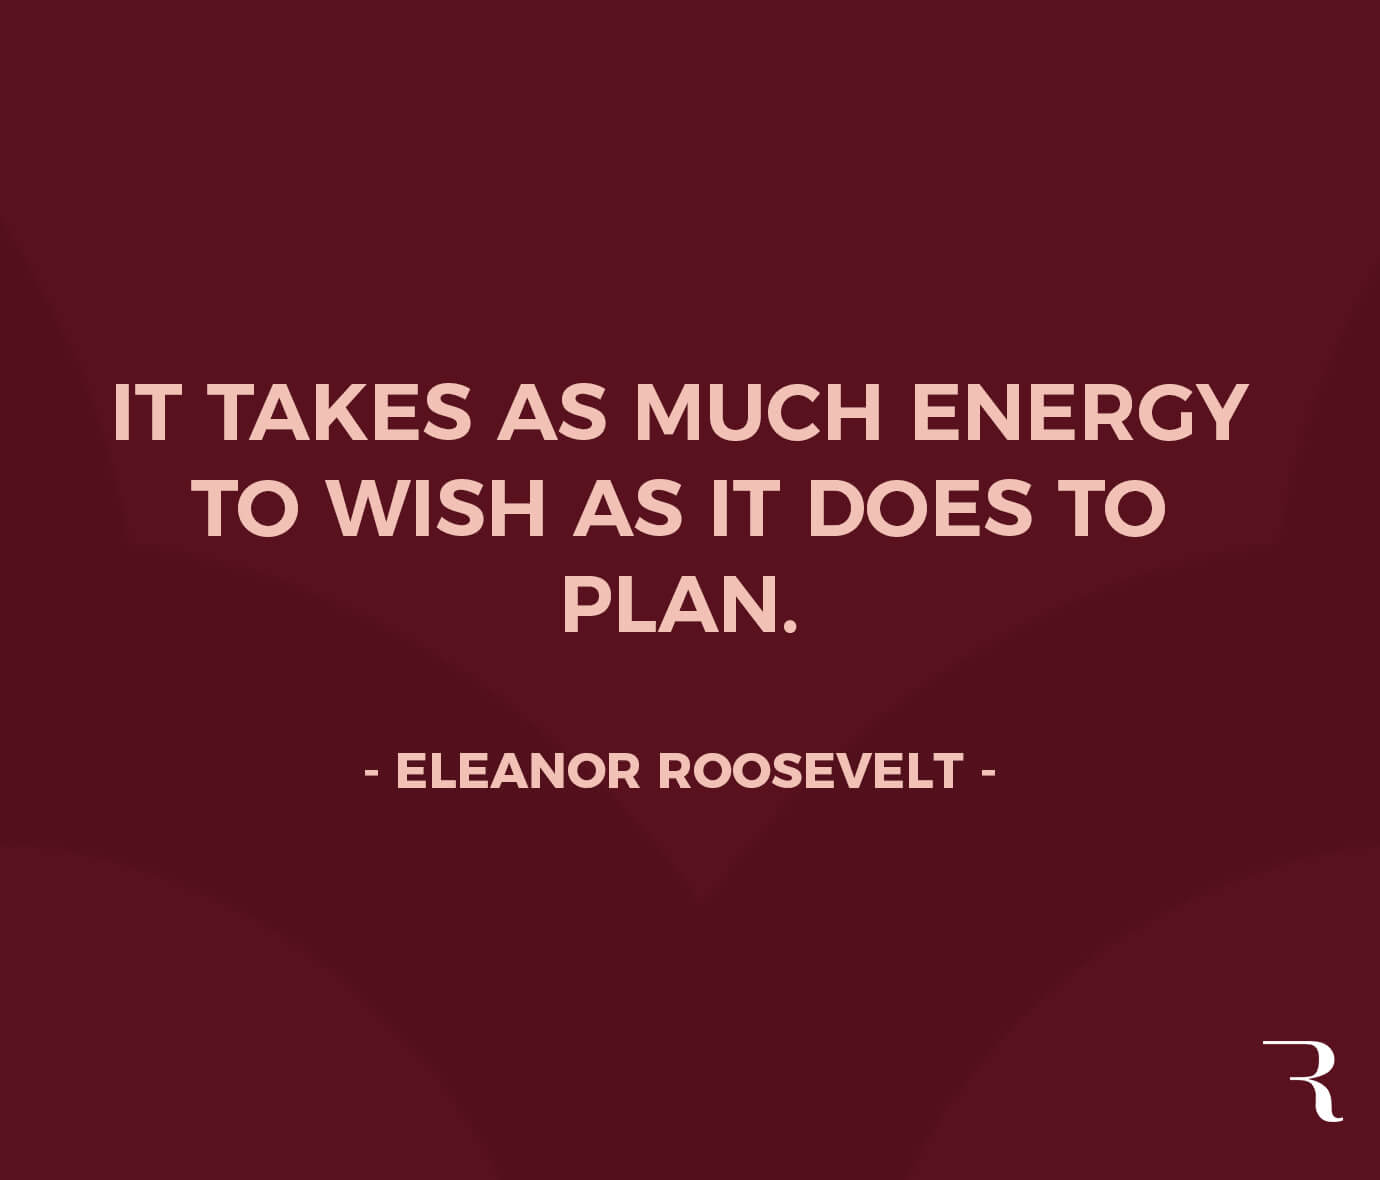 Motivational Quotes: "It takes as much energy to wish as it does to plan." 112 Motivational Quotes to Be a Better Entrepreneur